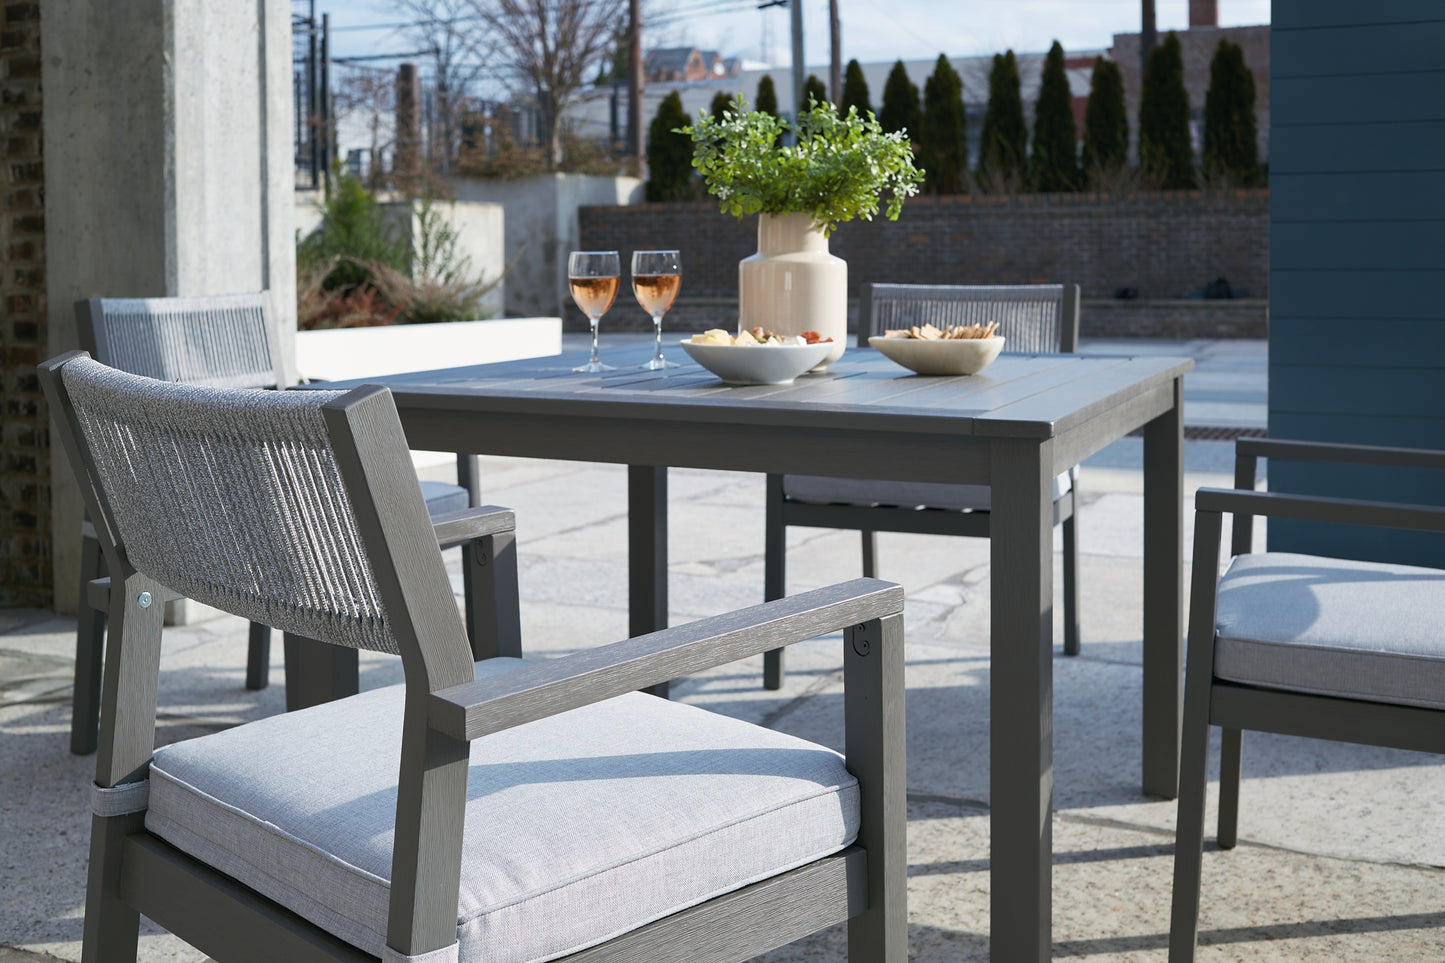 Ashley Express - Eden Town Outdoor Dining Table and 4 Chairs